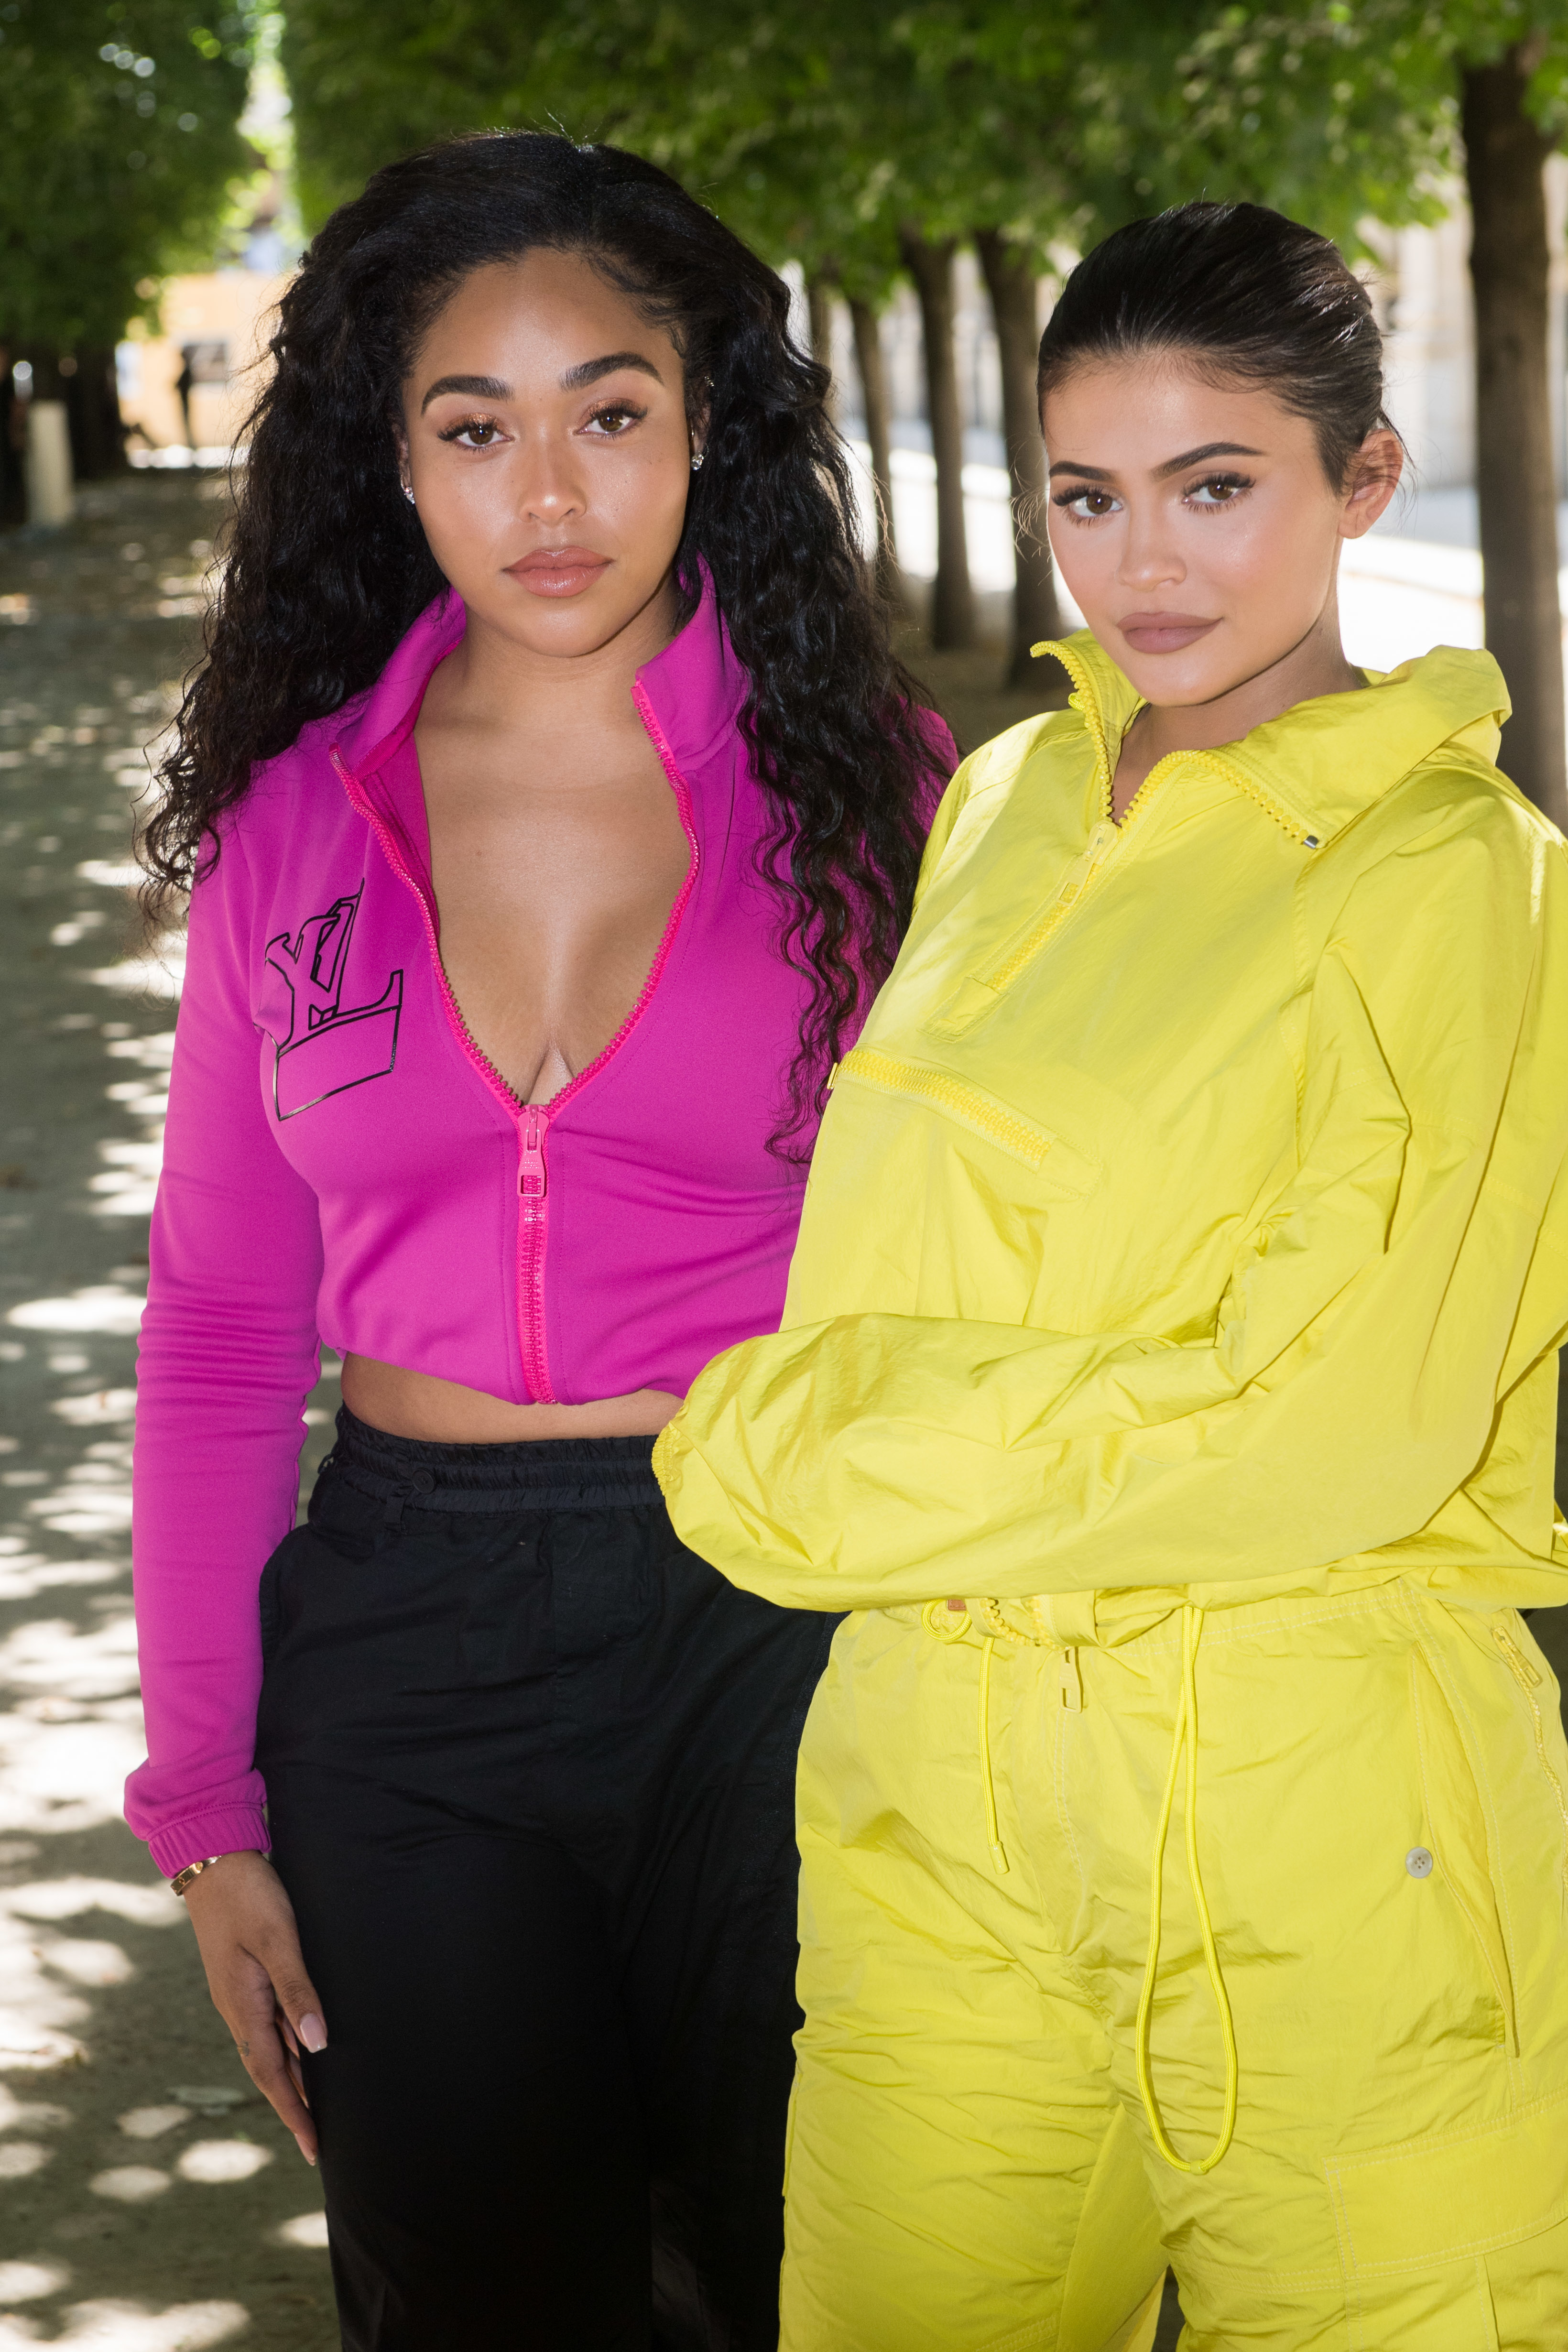 Close-up of Jordyn and Kylie standing together